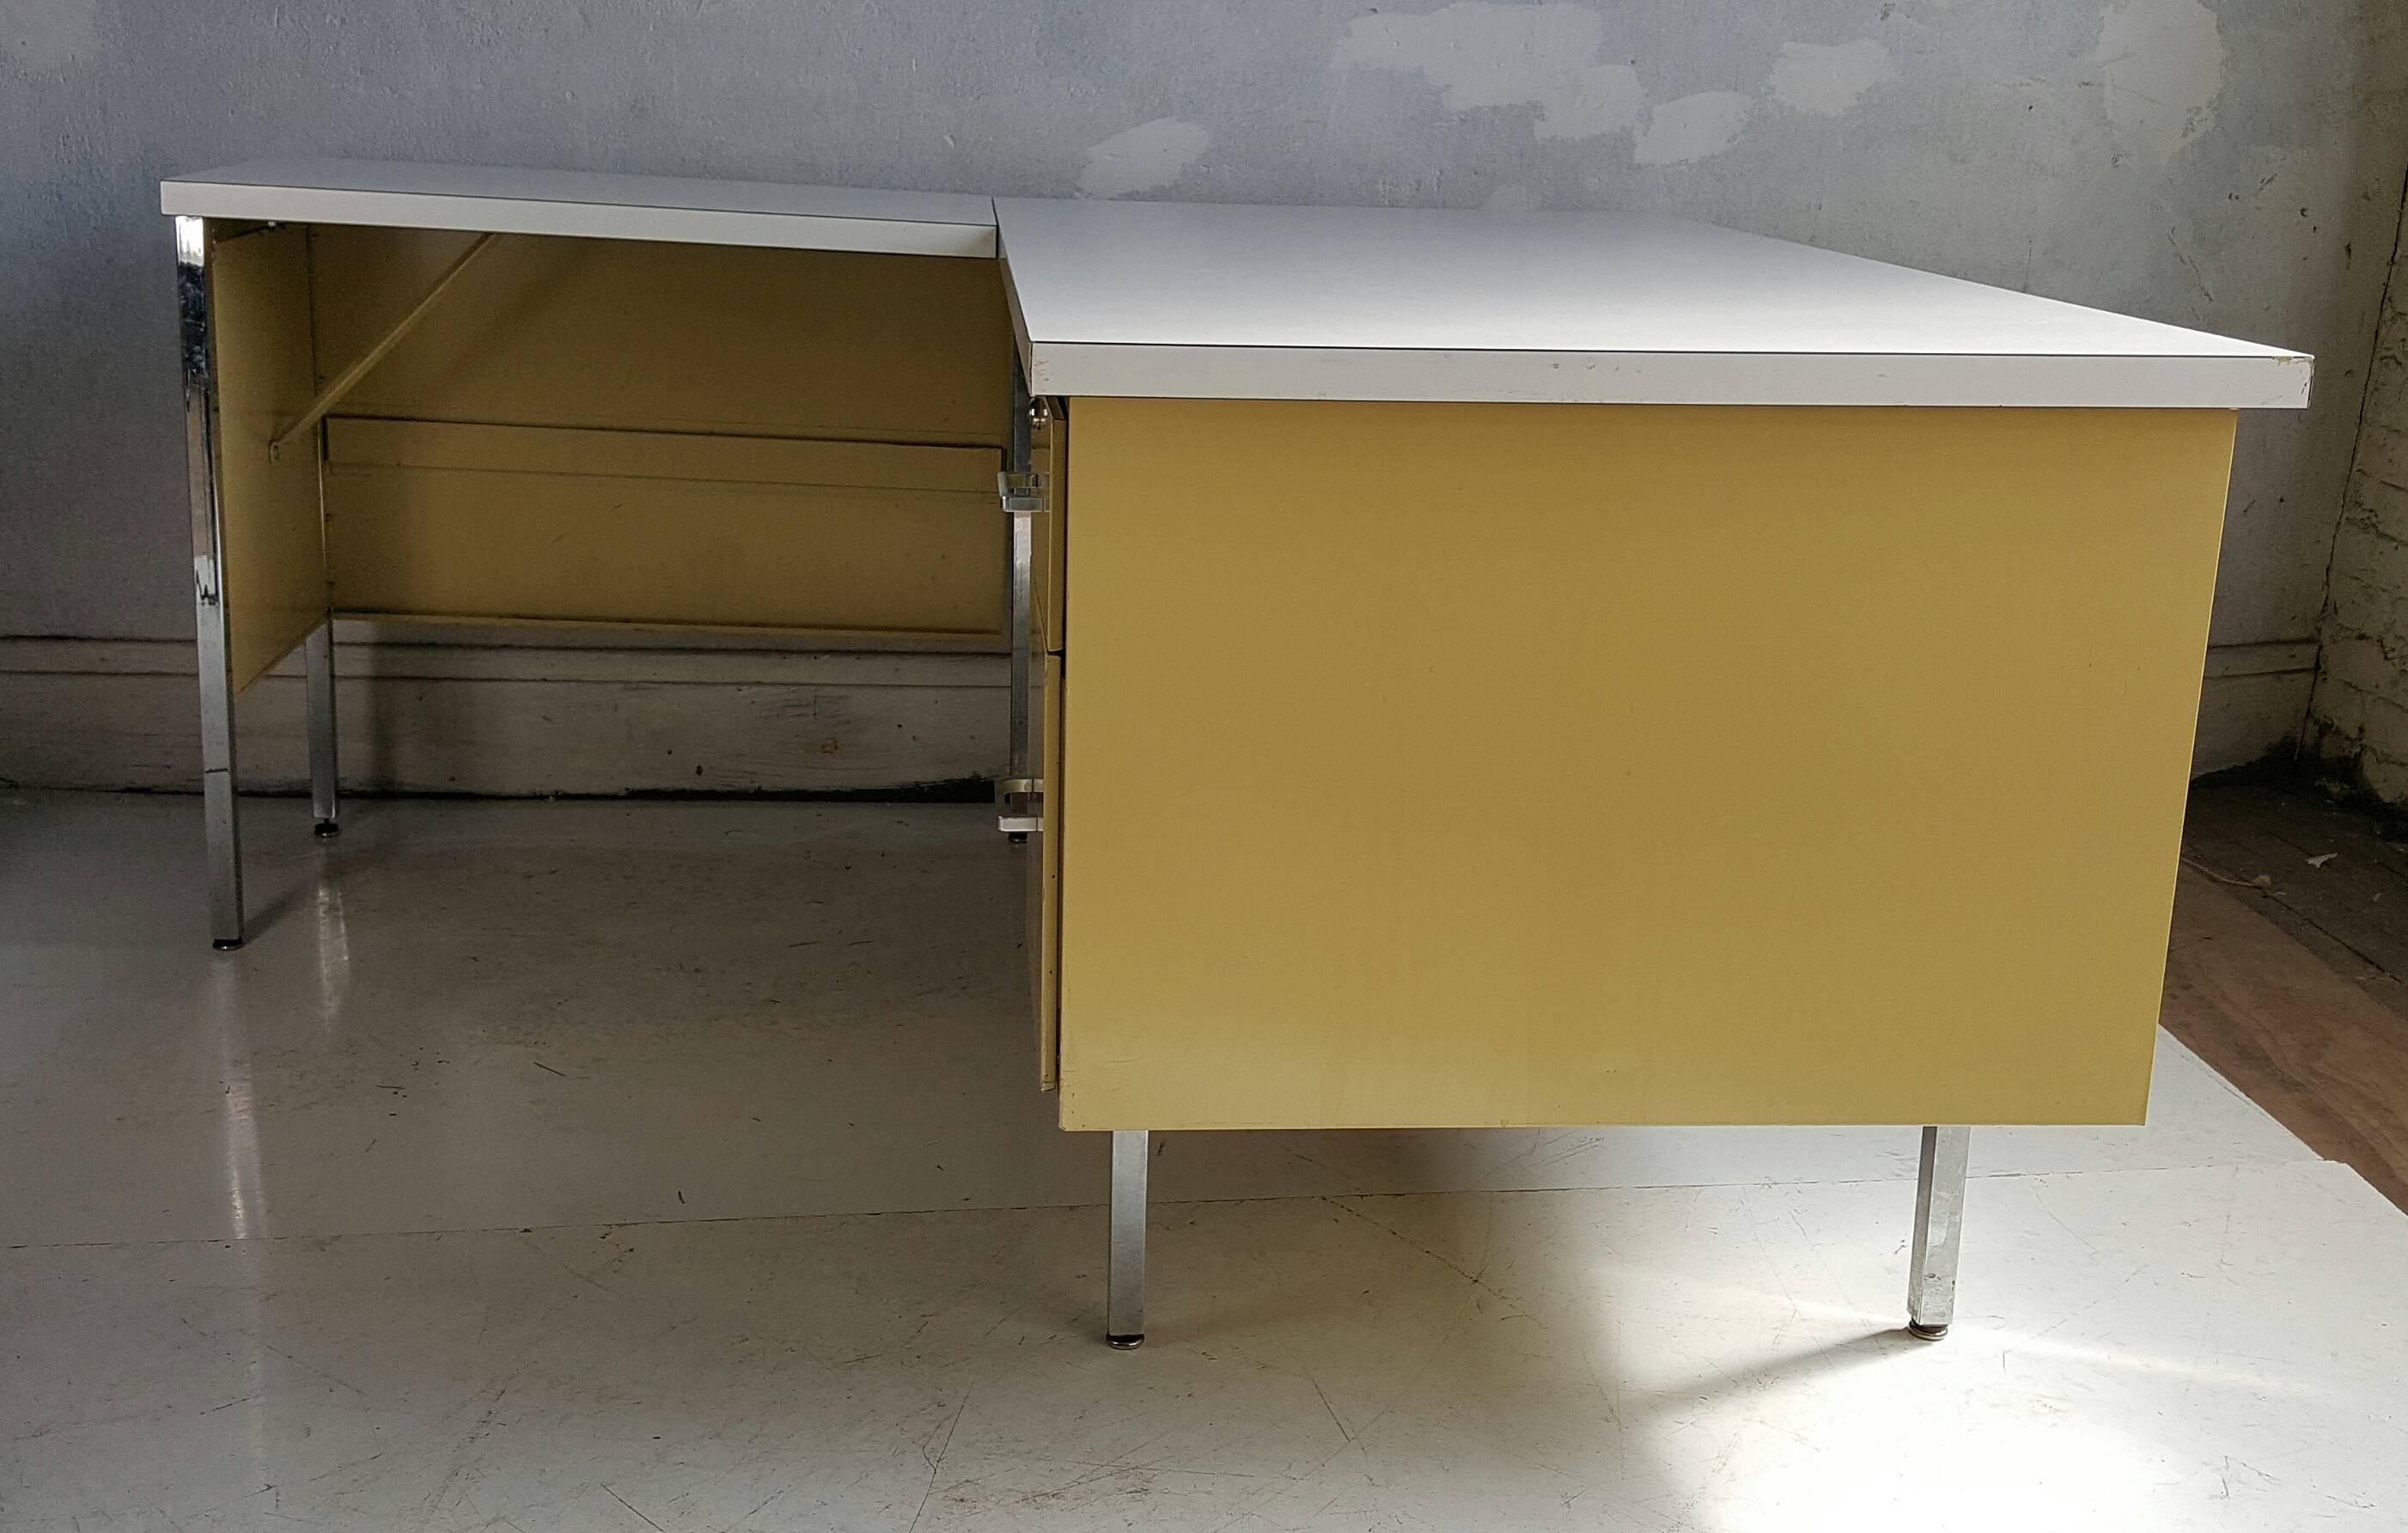 Mid Century Modern metal L-shape desk, made by Designcraft, Classic 1960s Yellow-green color. Retains original white laminate top. Generous top drawer as well as file drawer.